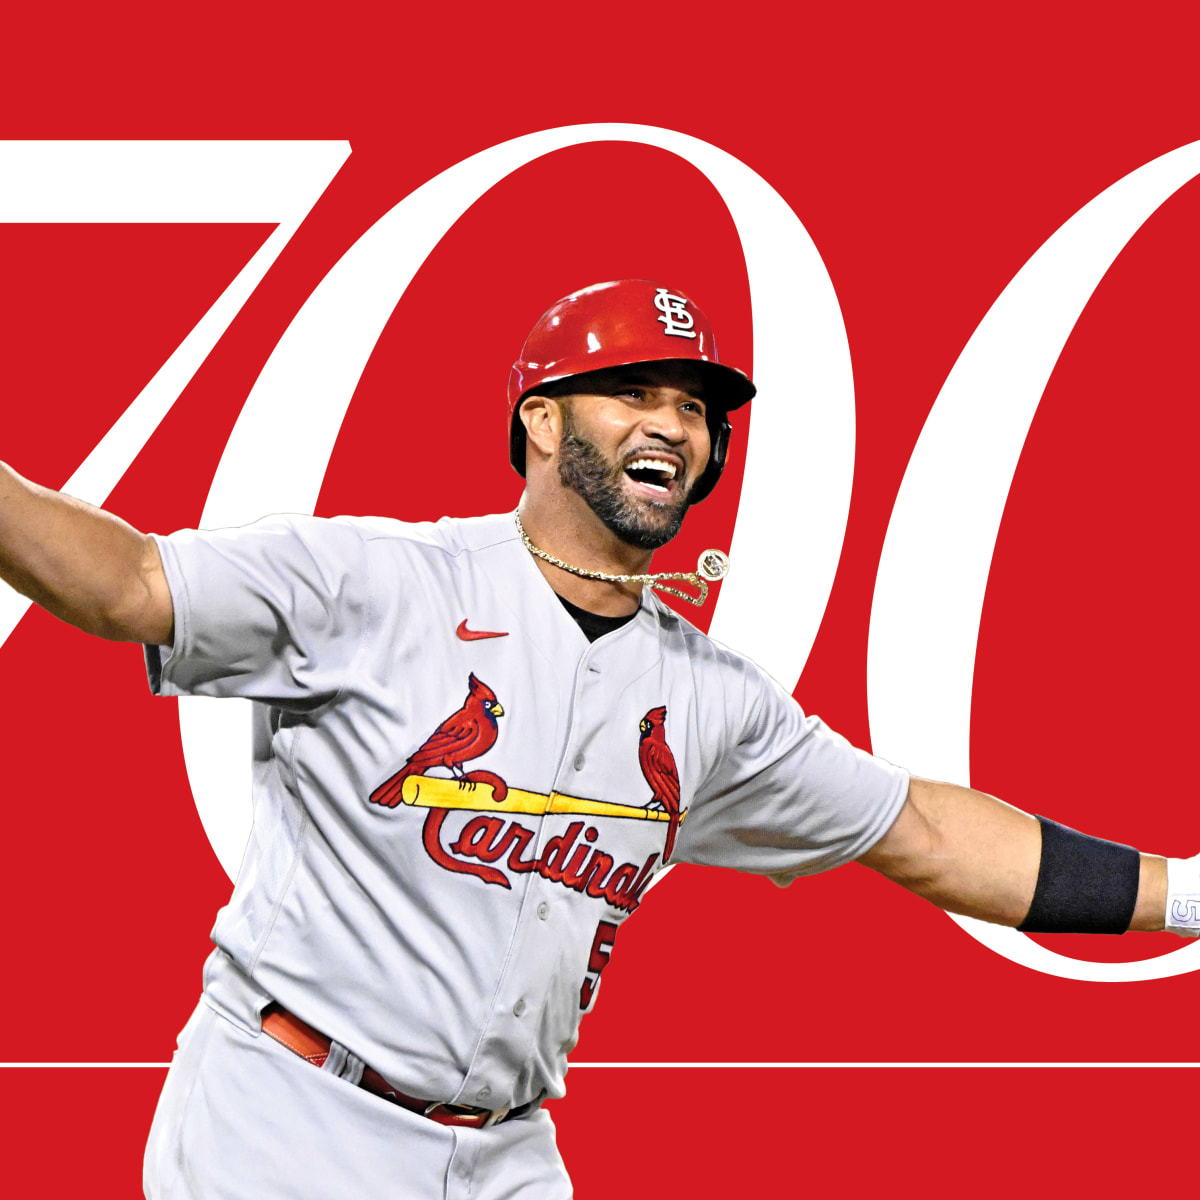 Albert Pujols joins 700-HR club - The best stories from those who